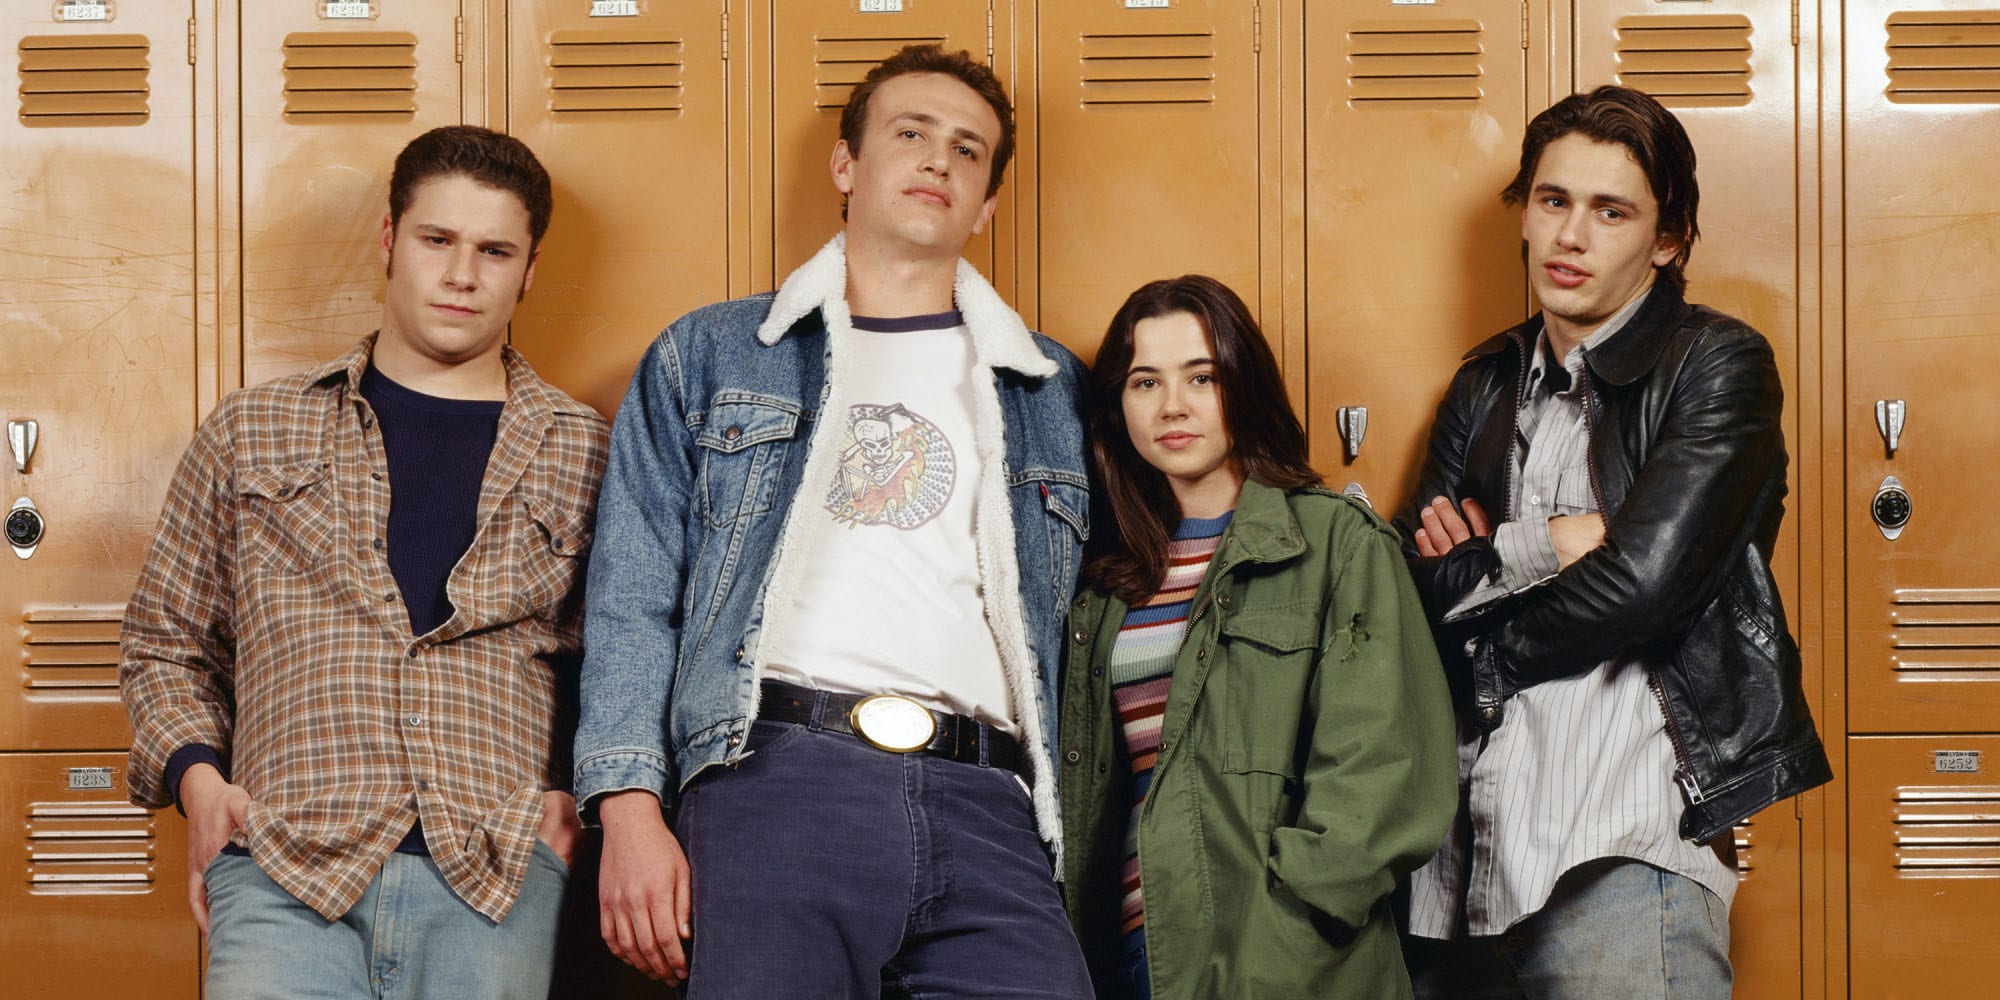 Premiering in 1999, Judd Apatow and Paul Feig’s 'Freaks and Geeks' was unlike any other show that had come before it. Here's why it shouldn't be rebooted.